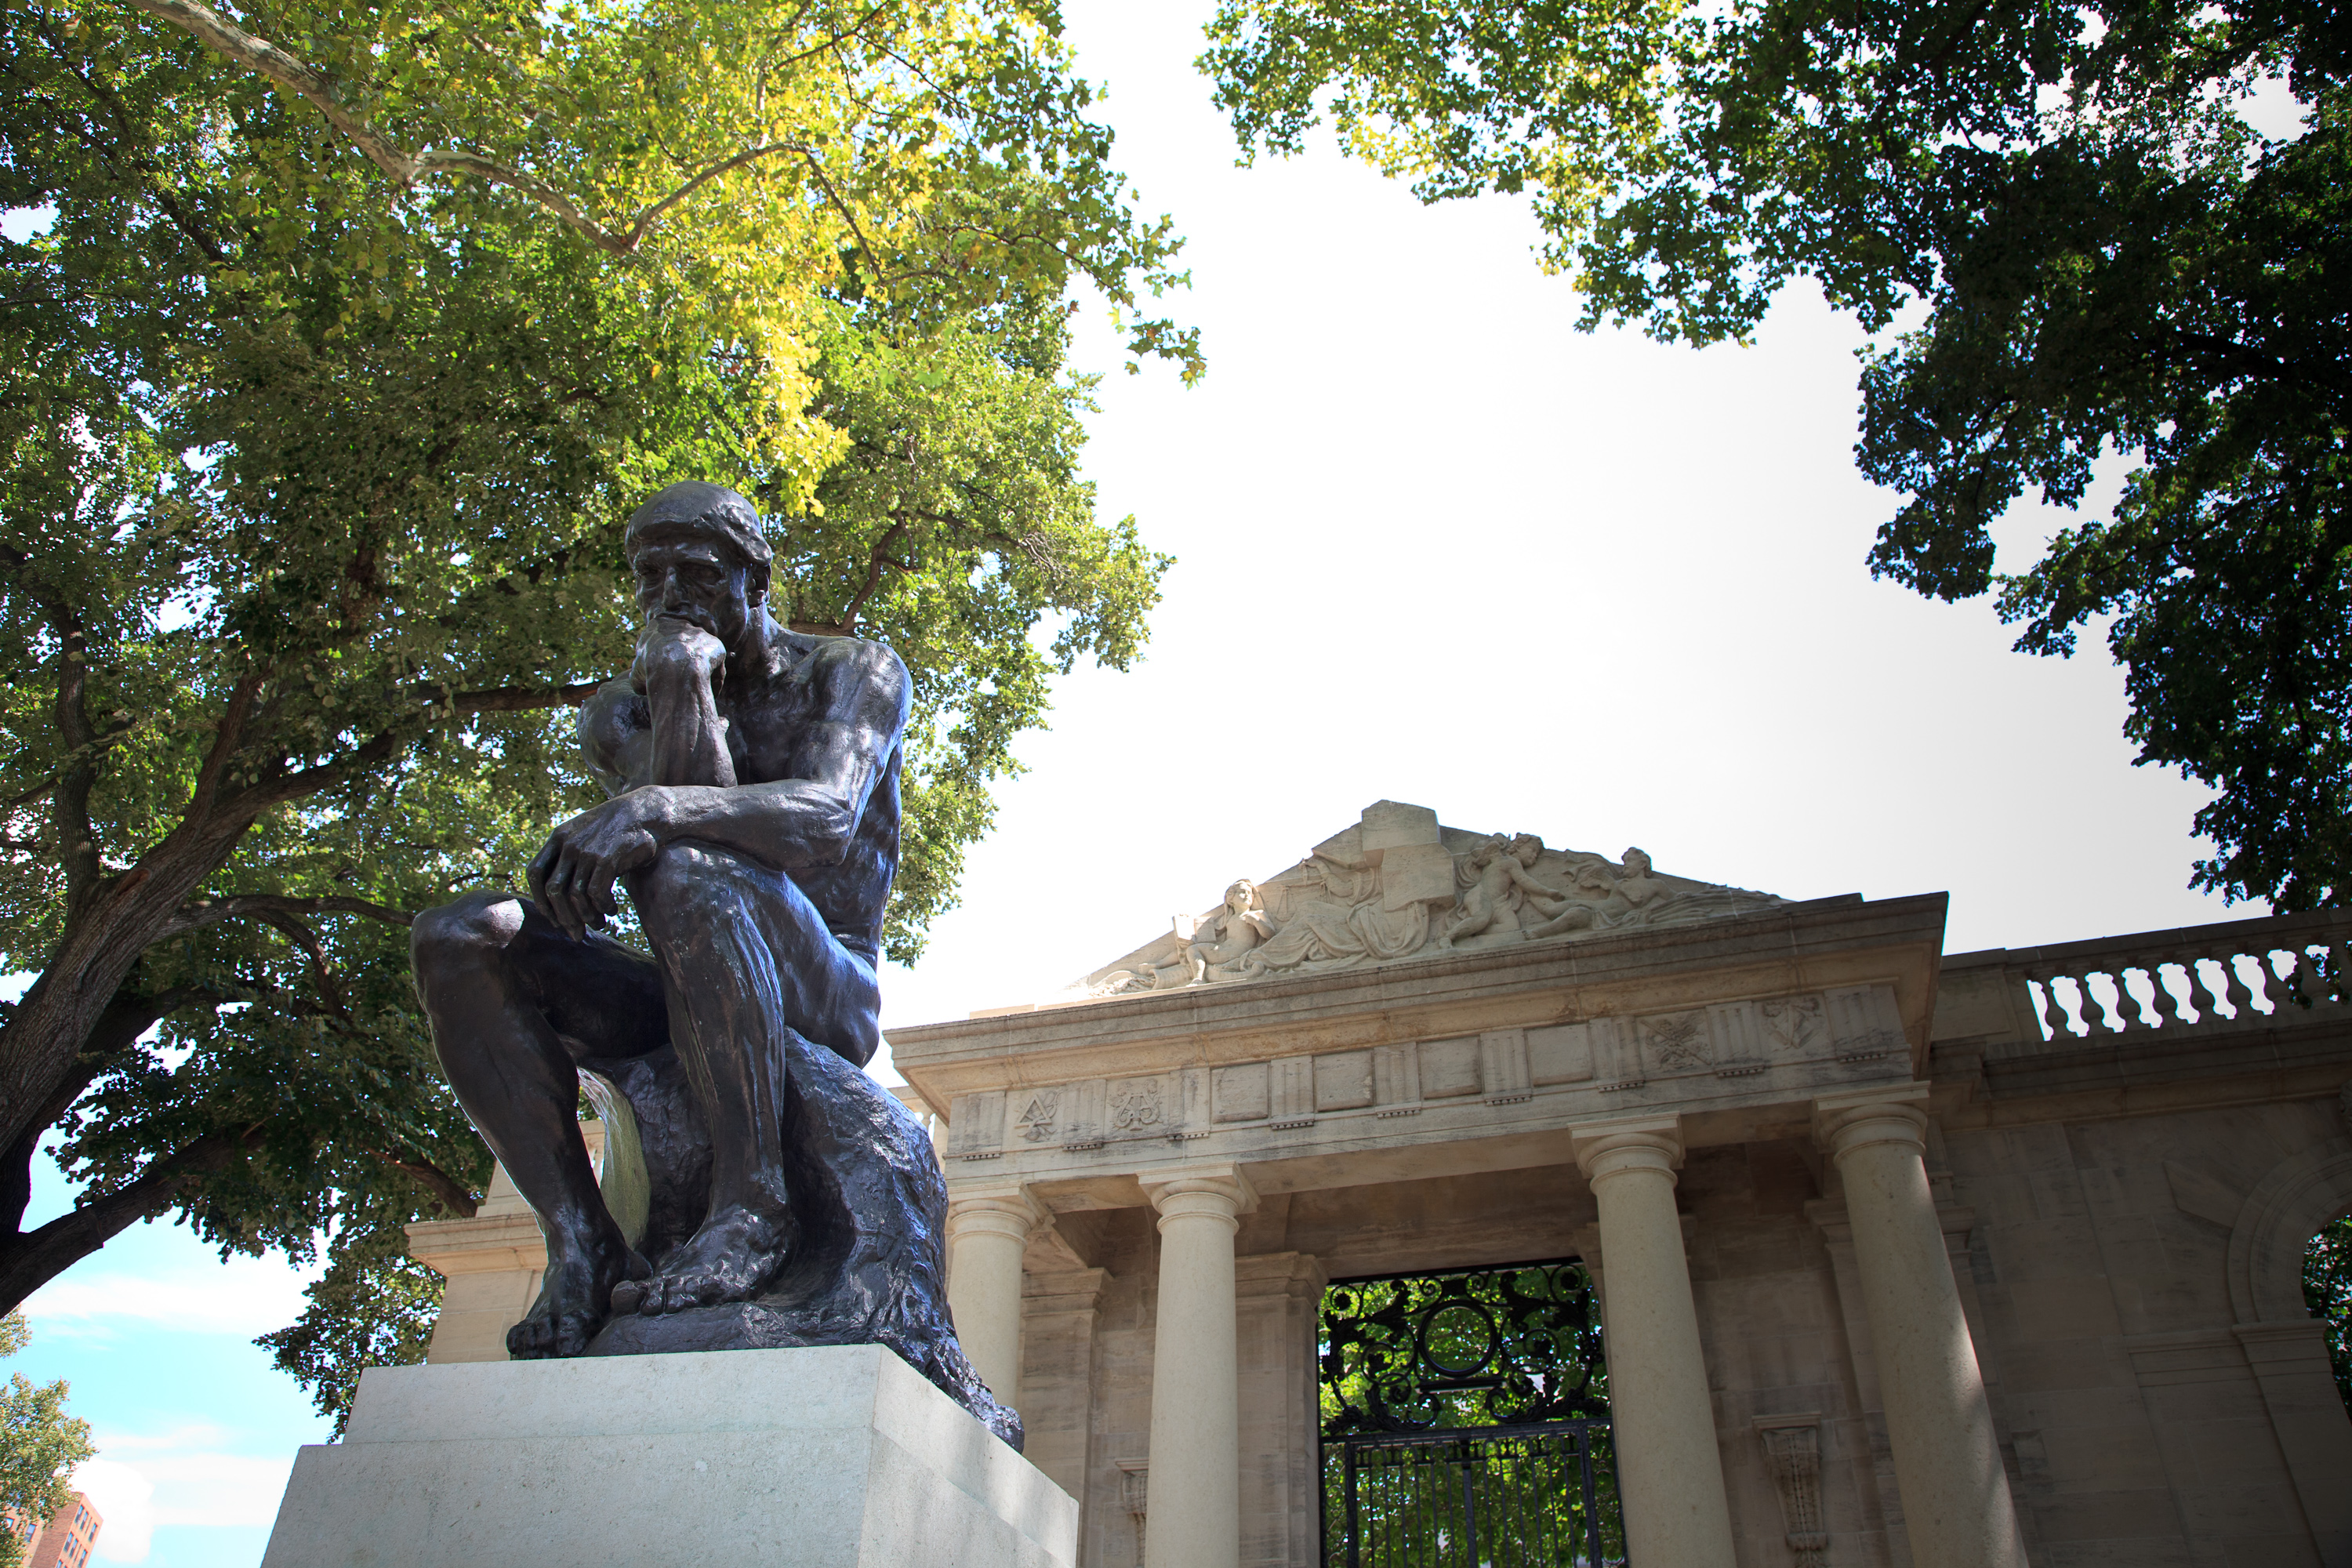 The Rodin Museum. Photo Credit: Photo by Paul Loftland for PHLCVB